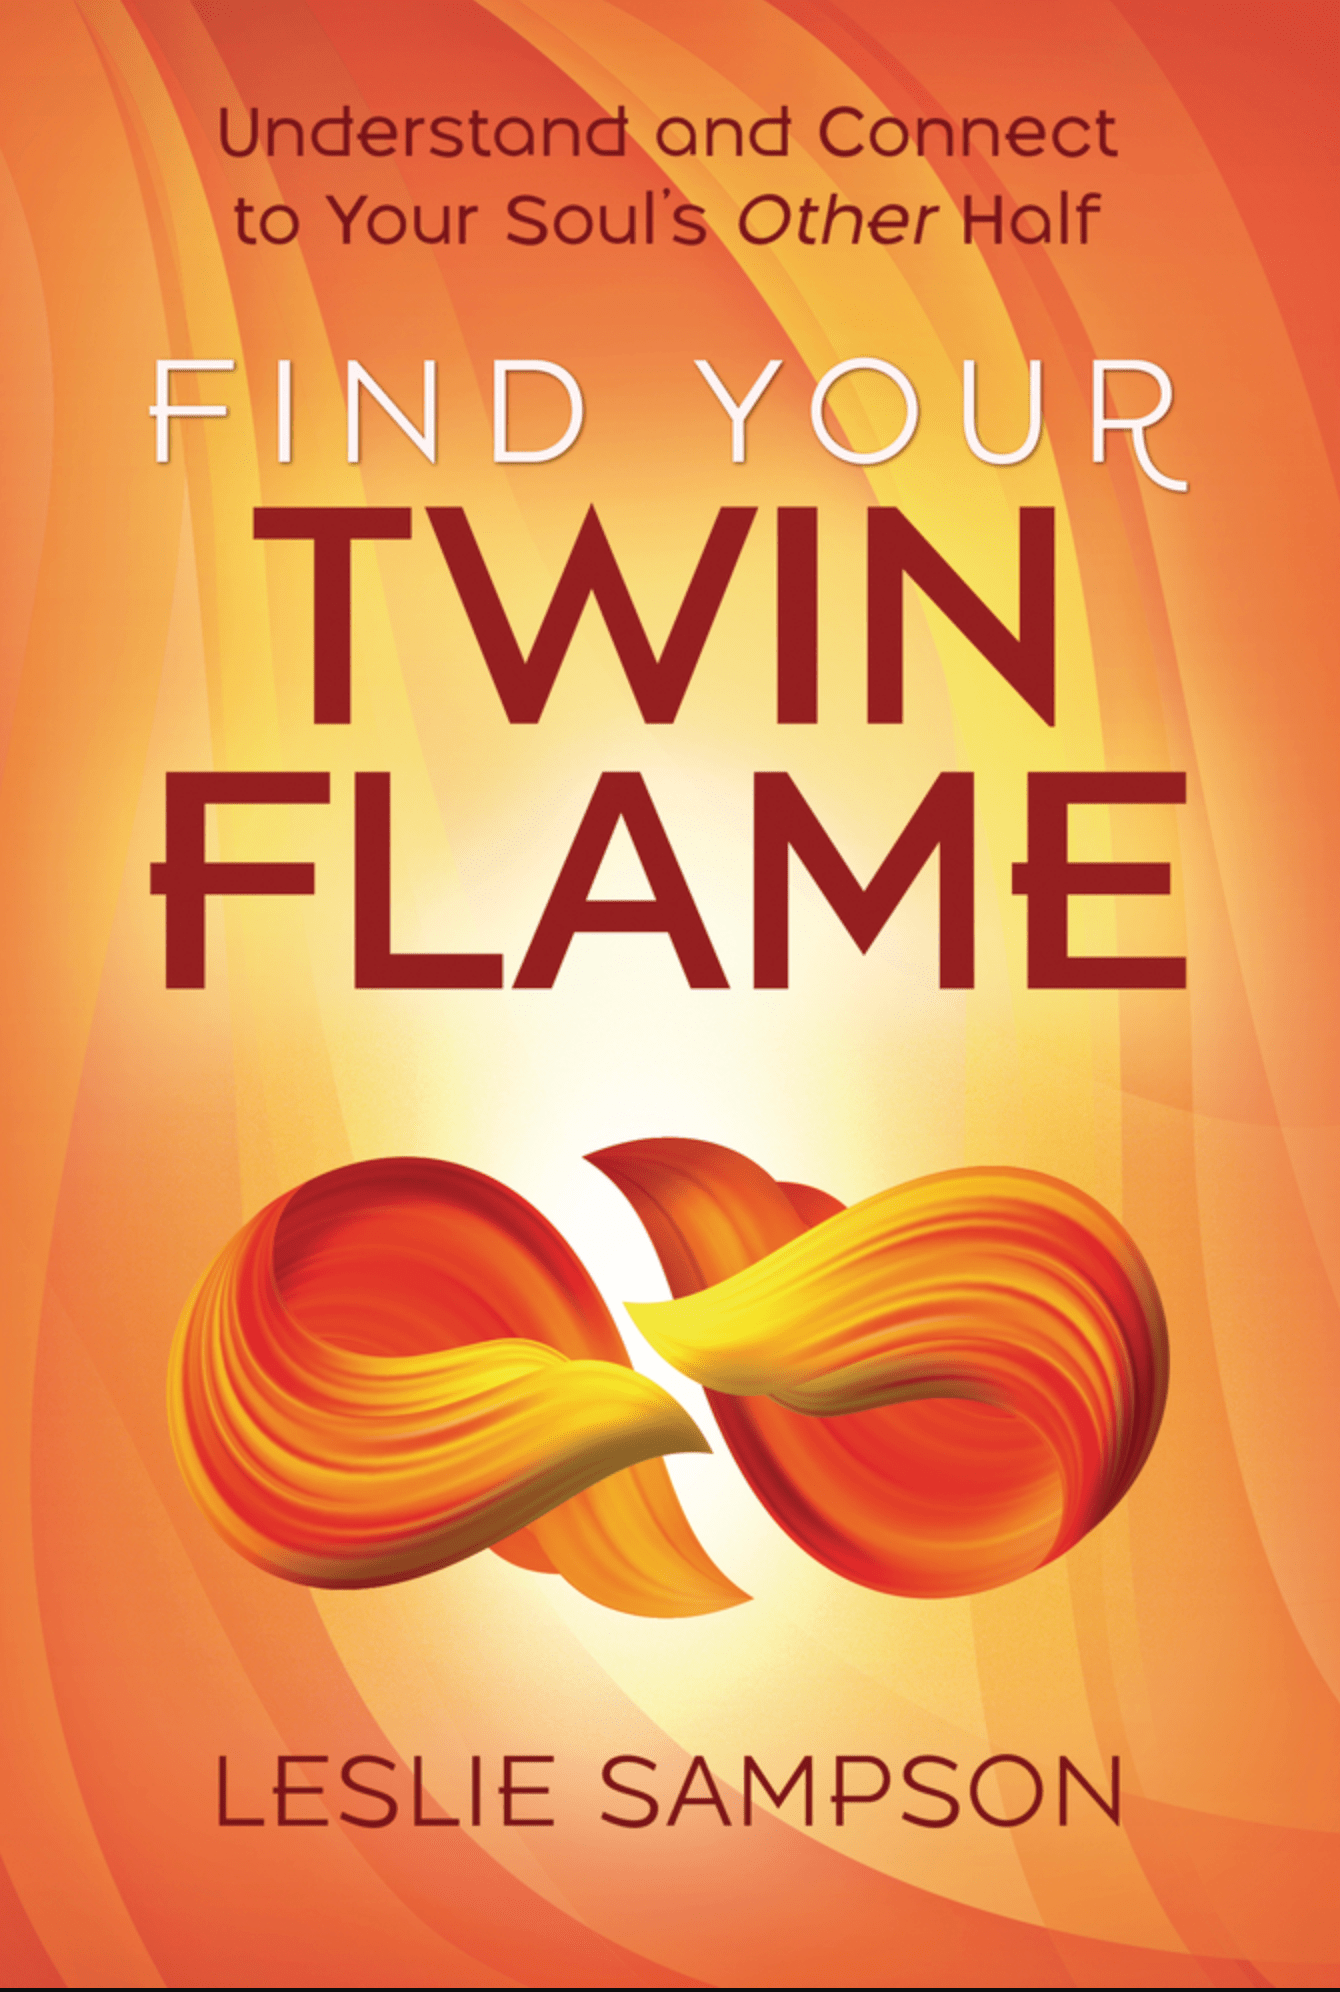 Find Your Twin Flame: Understand and Connect to Your Soul's Other Half - Spiral Circle